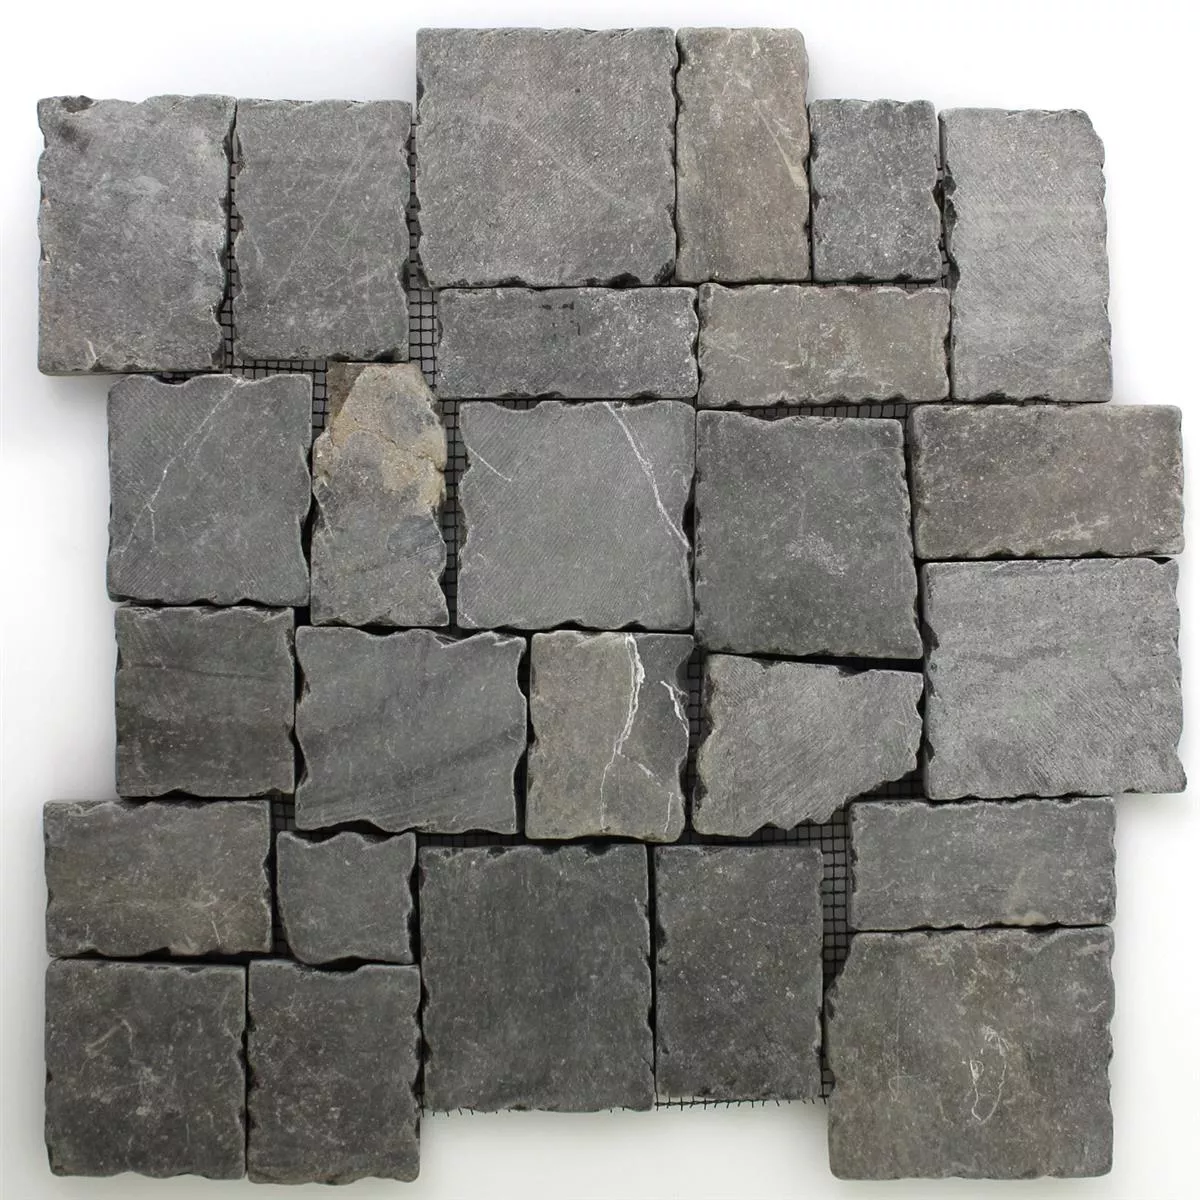 Sample Mosaic Tiles Natural Stone Anthracite Drummed